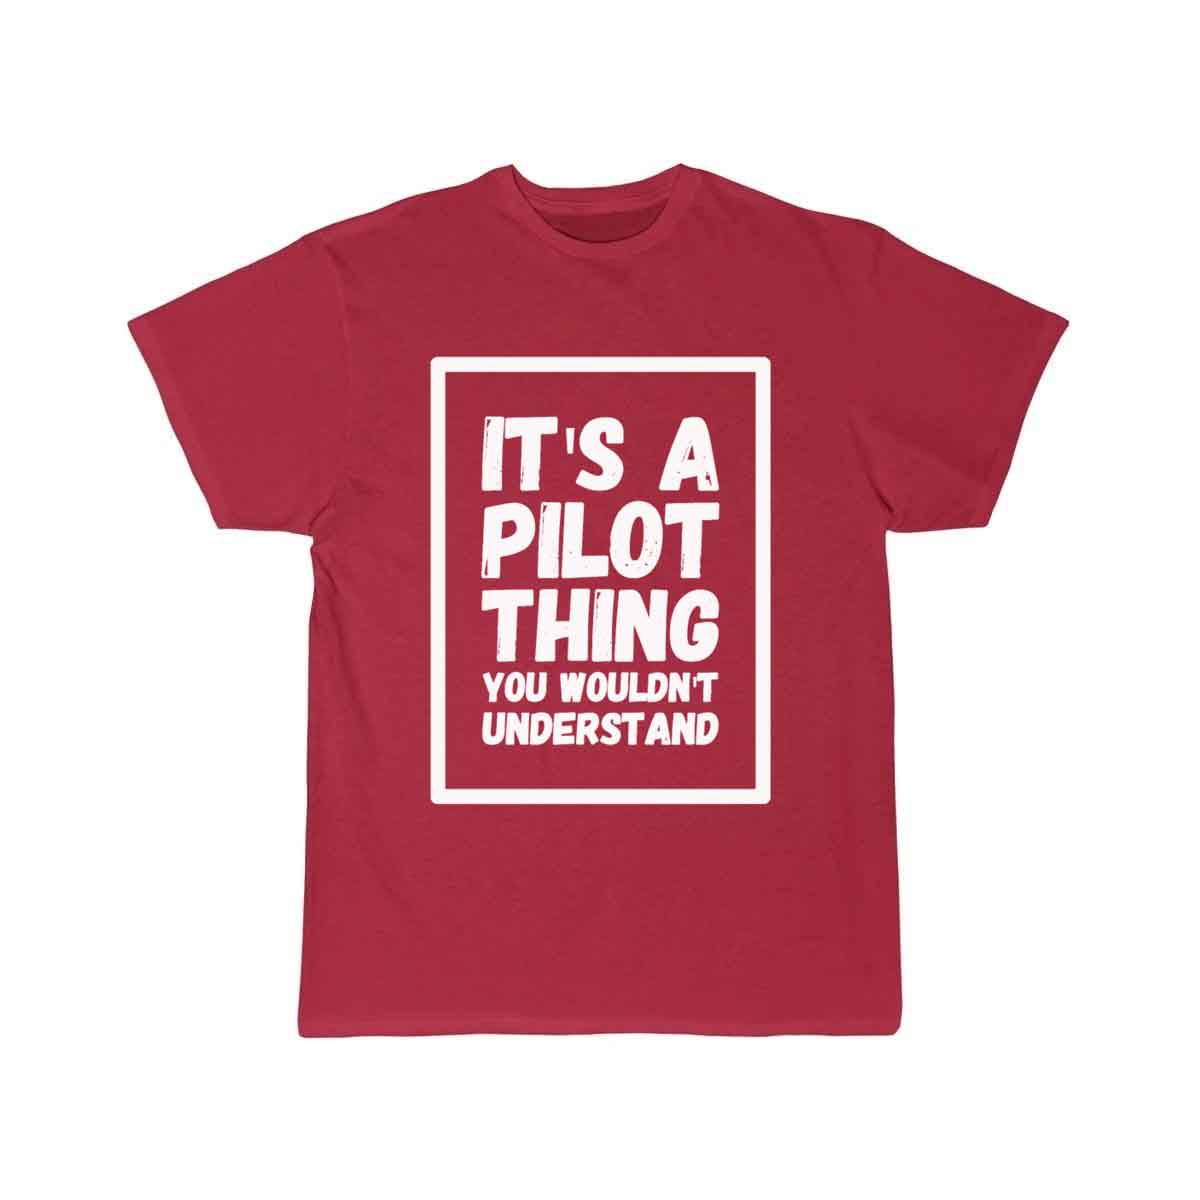 It's a pilot thing you wouldn't understand T-SHIRT THE AV8R